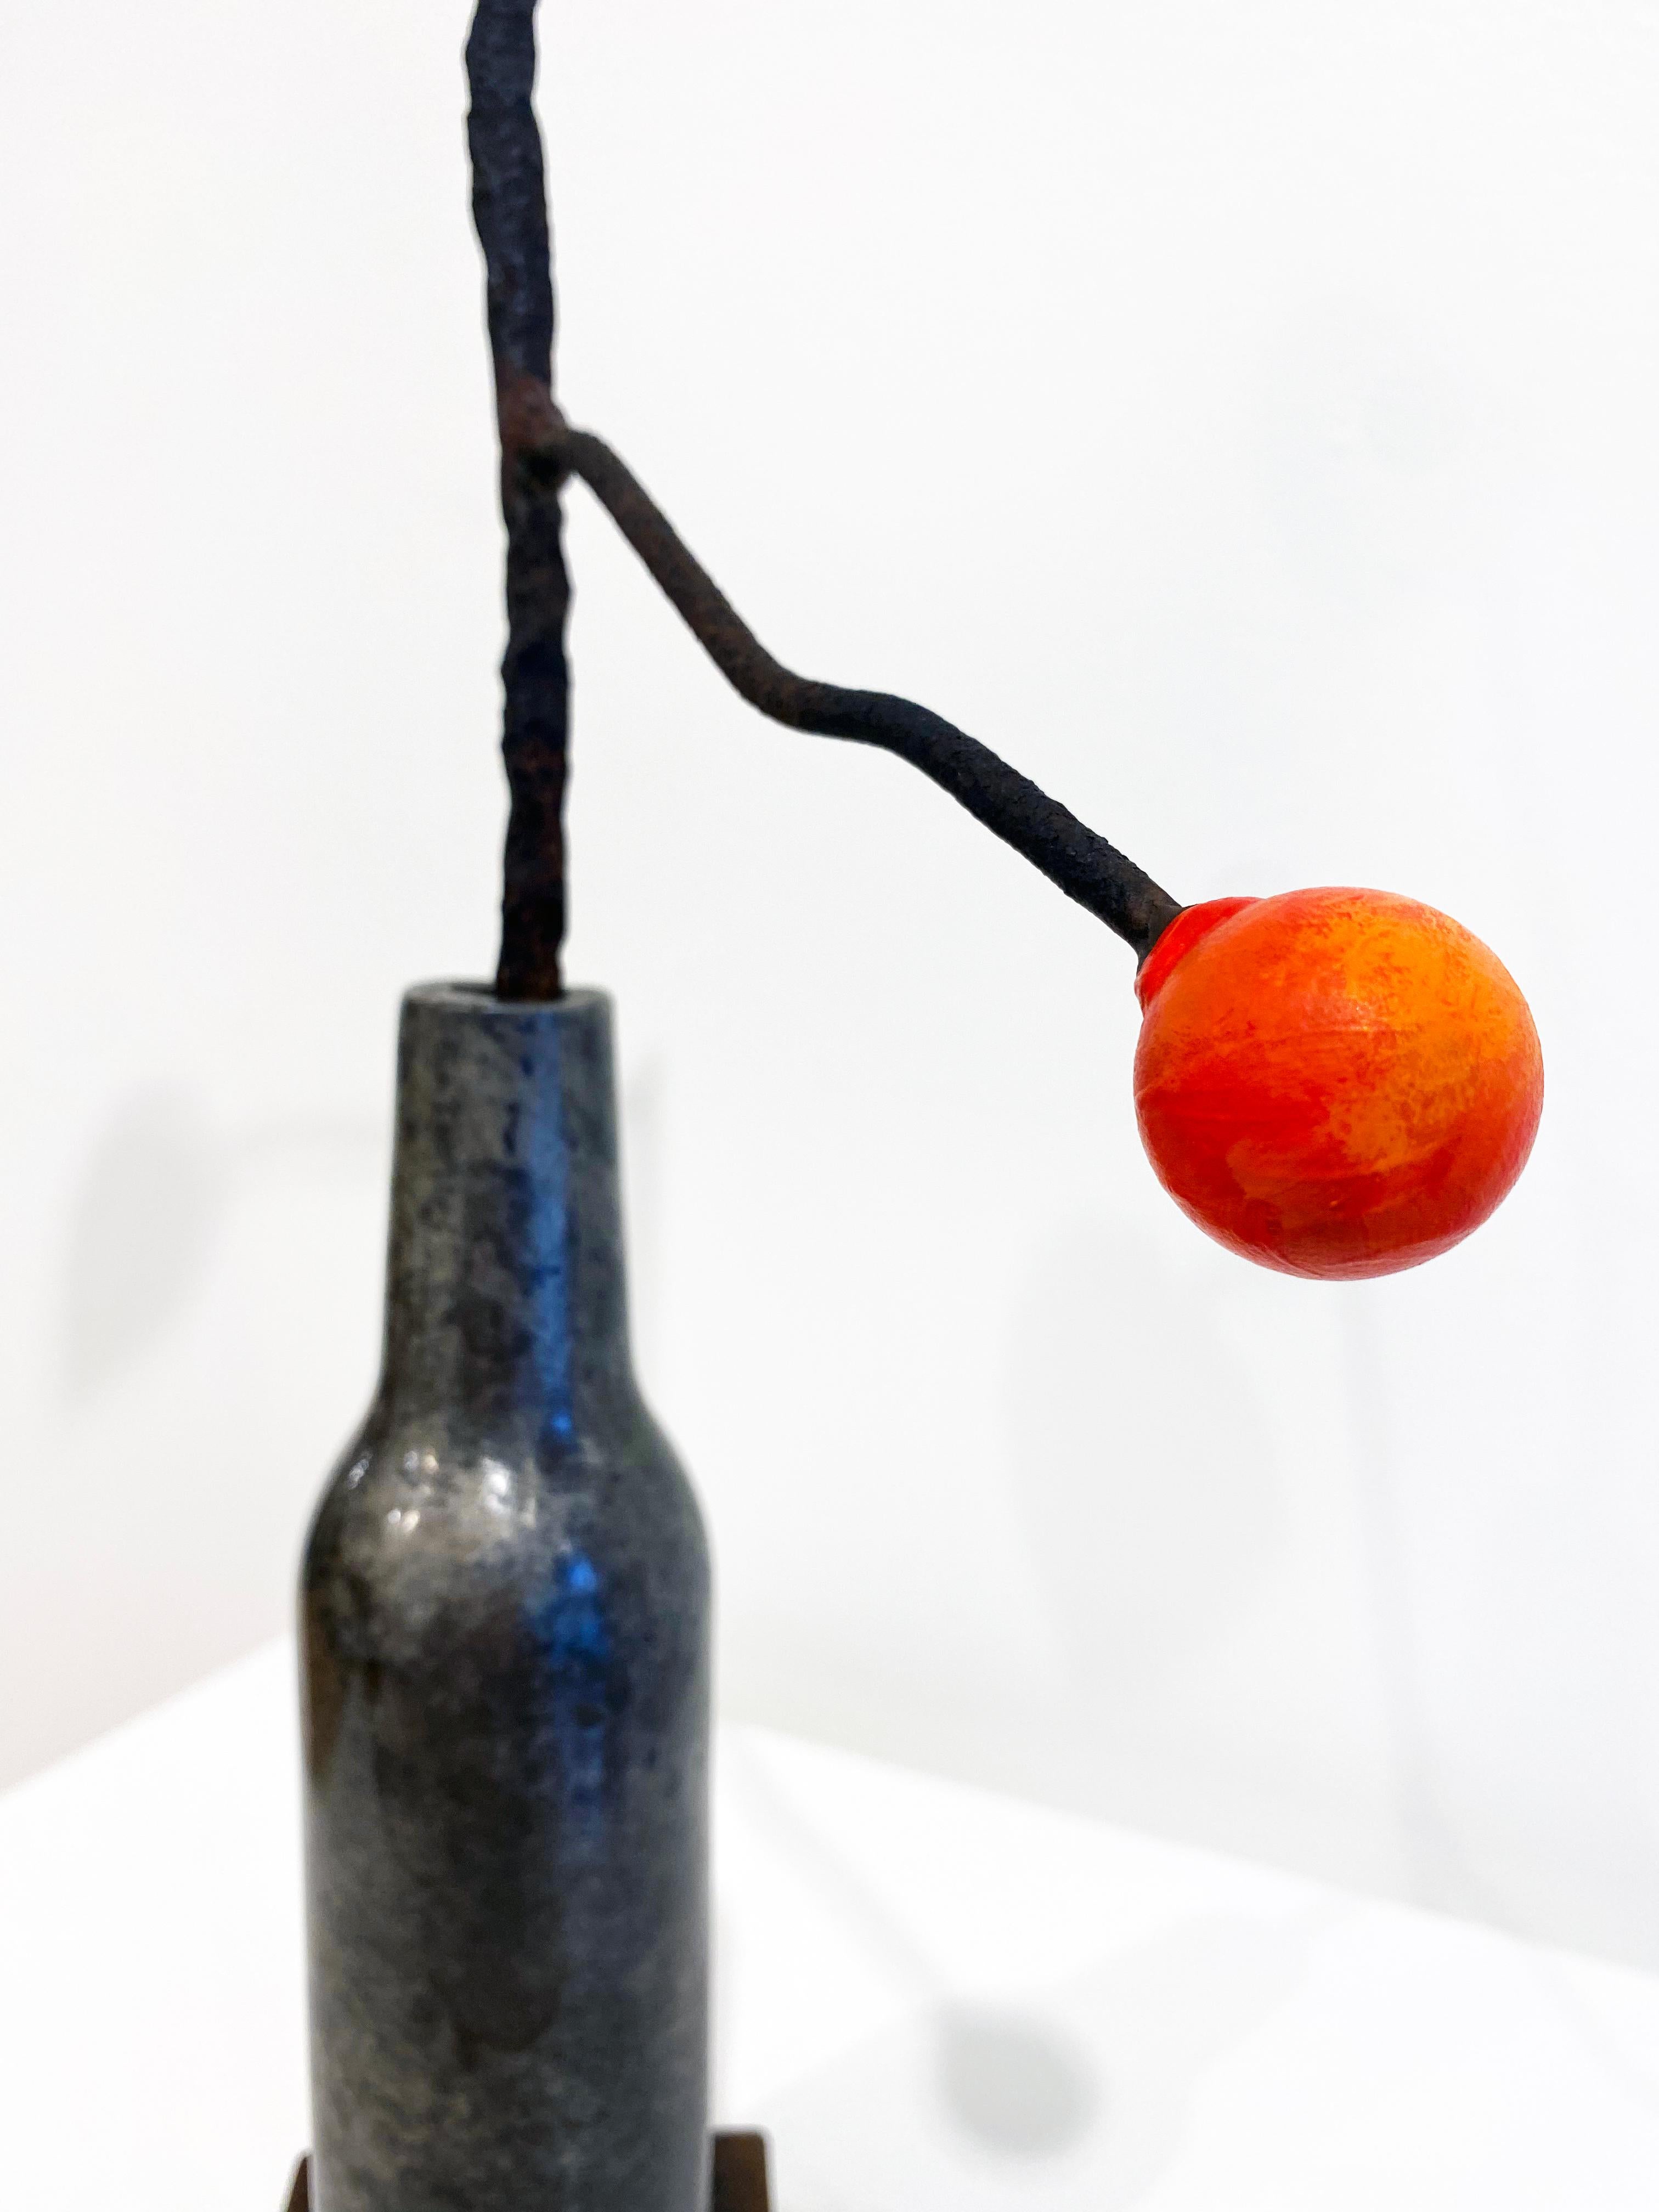 'Untitled 1' by David Kimball Anderson, 2021. Bronze, steel, and paint, 18 x 8 x 8 in. This sculpture features a rounded vase cast in bronze and finished in patinas of grey. It features a steel branch extending to  an orange bulb and green